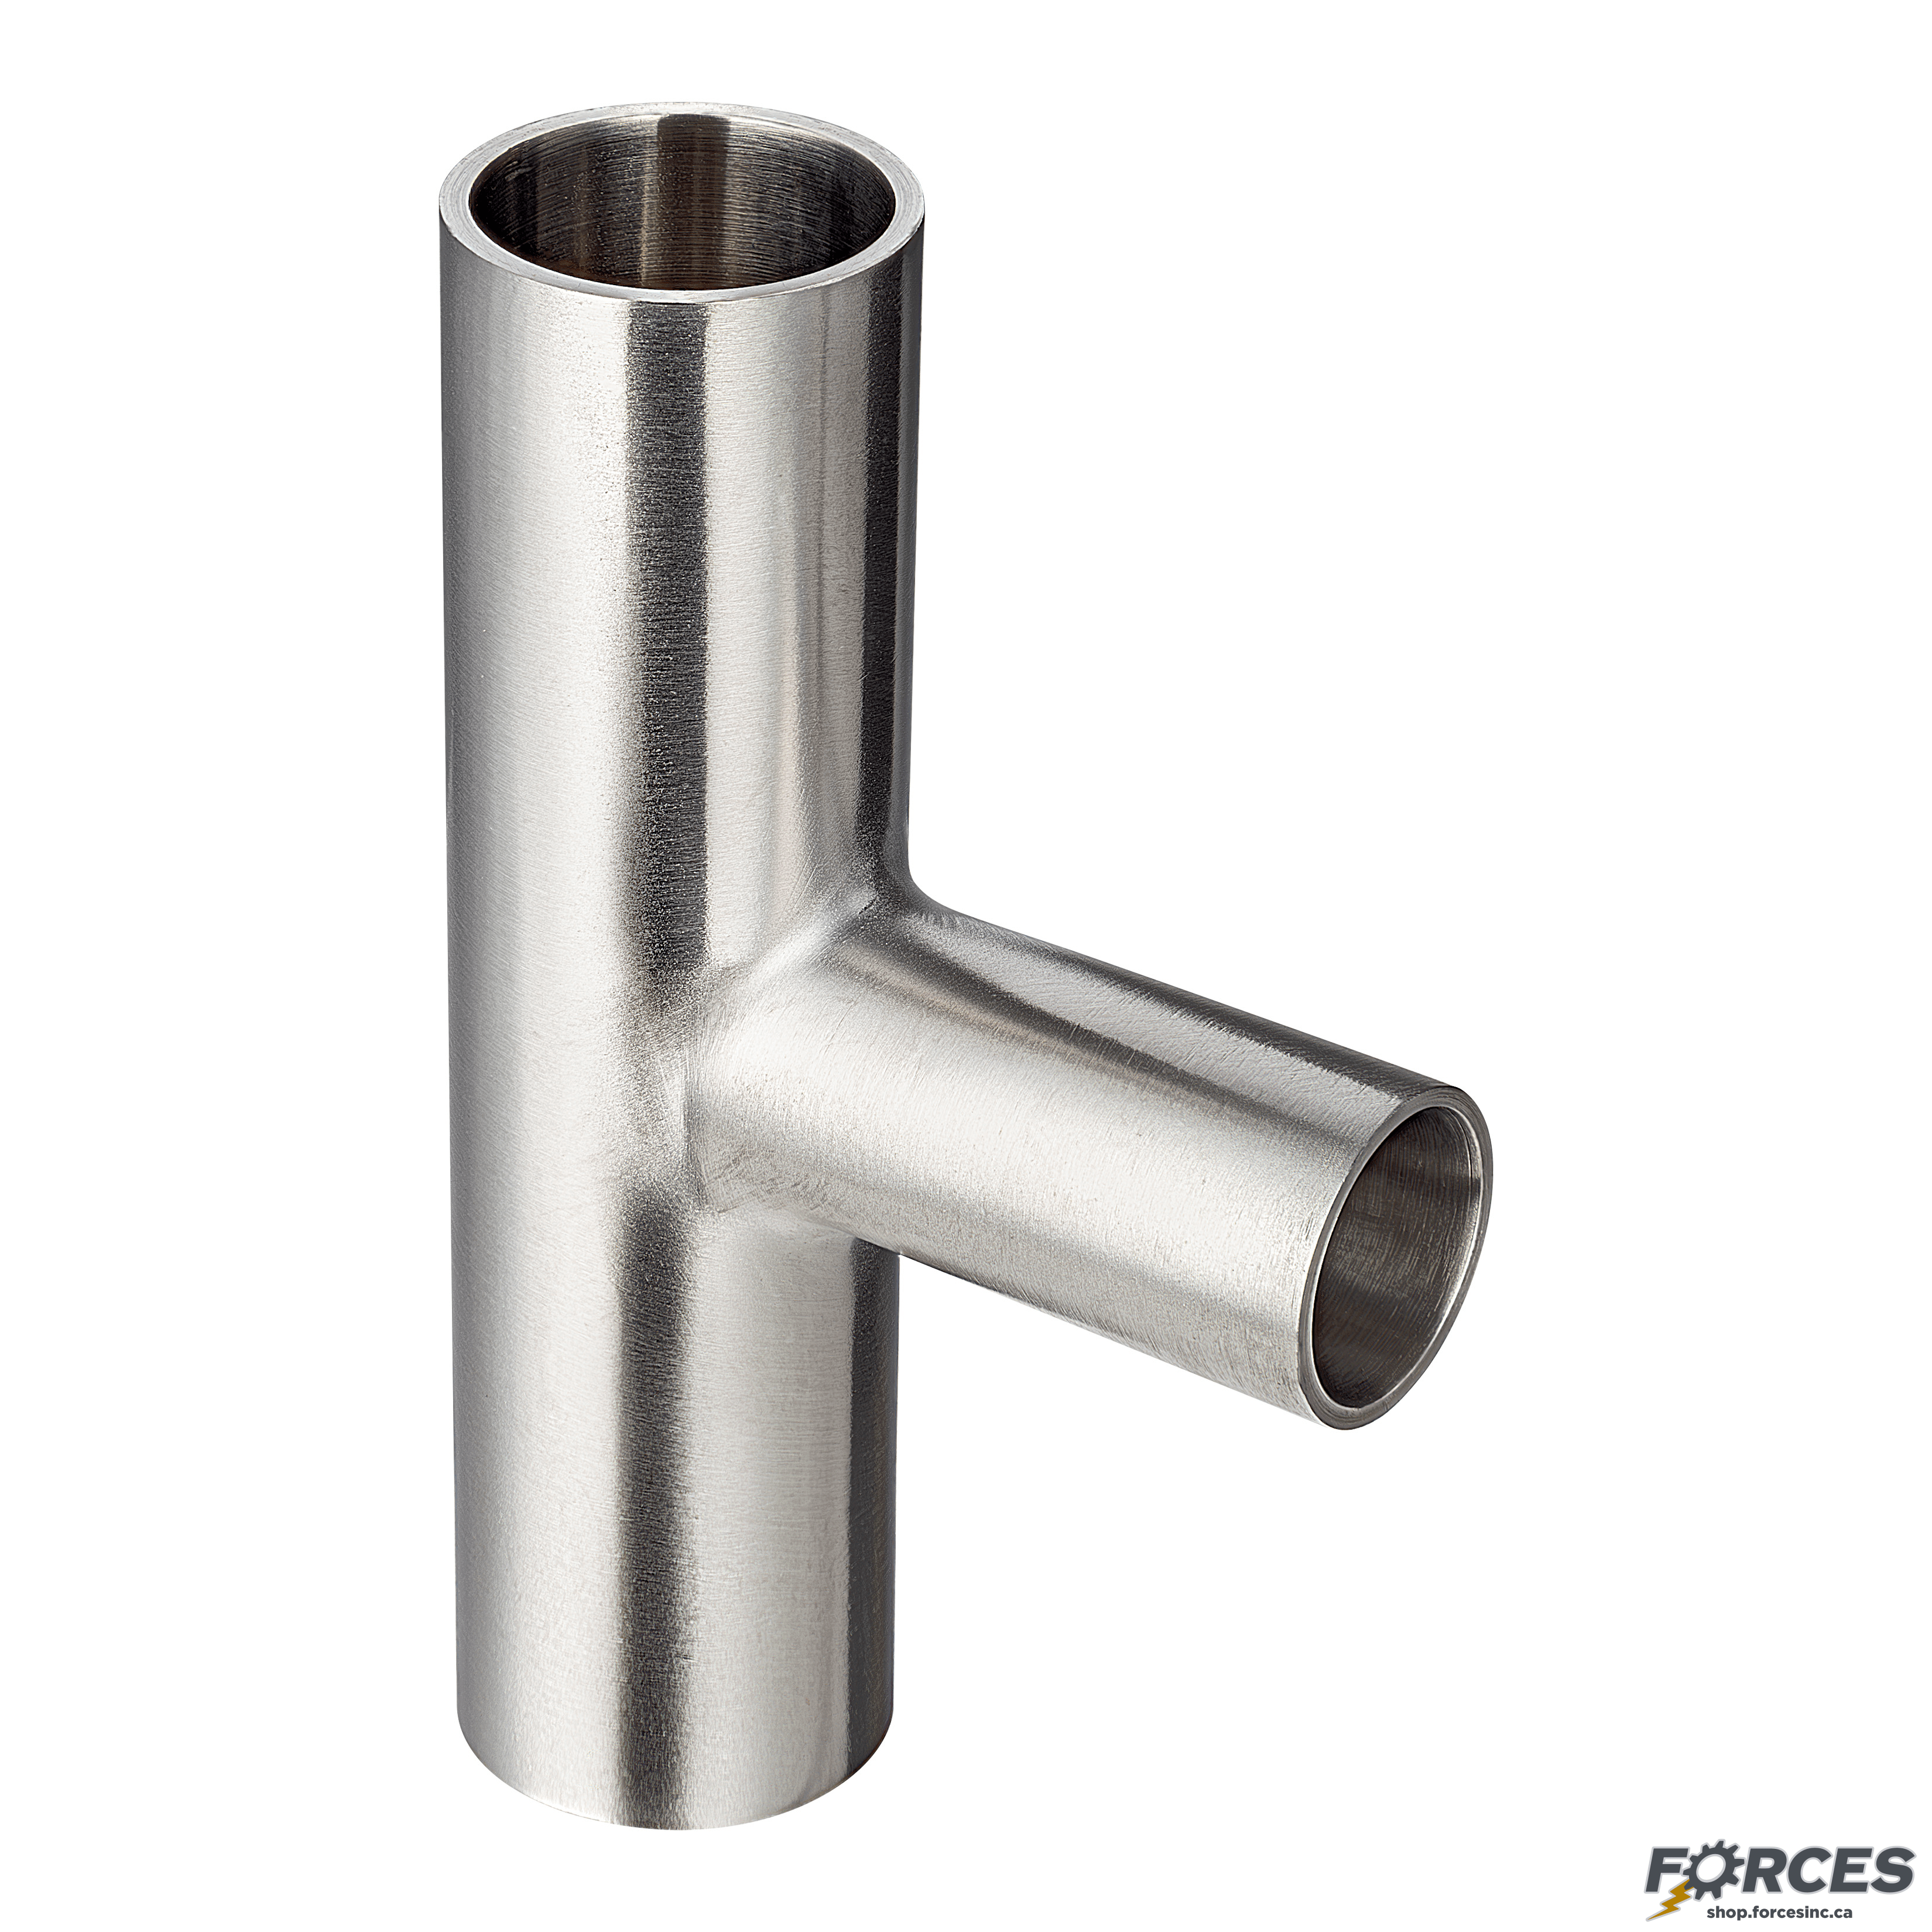 4" x 2" Butt Weld Tee Reducer - Stainless Steel 304 - Forces Inc